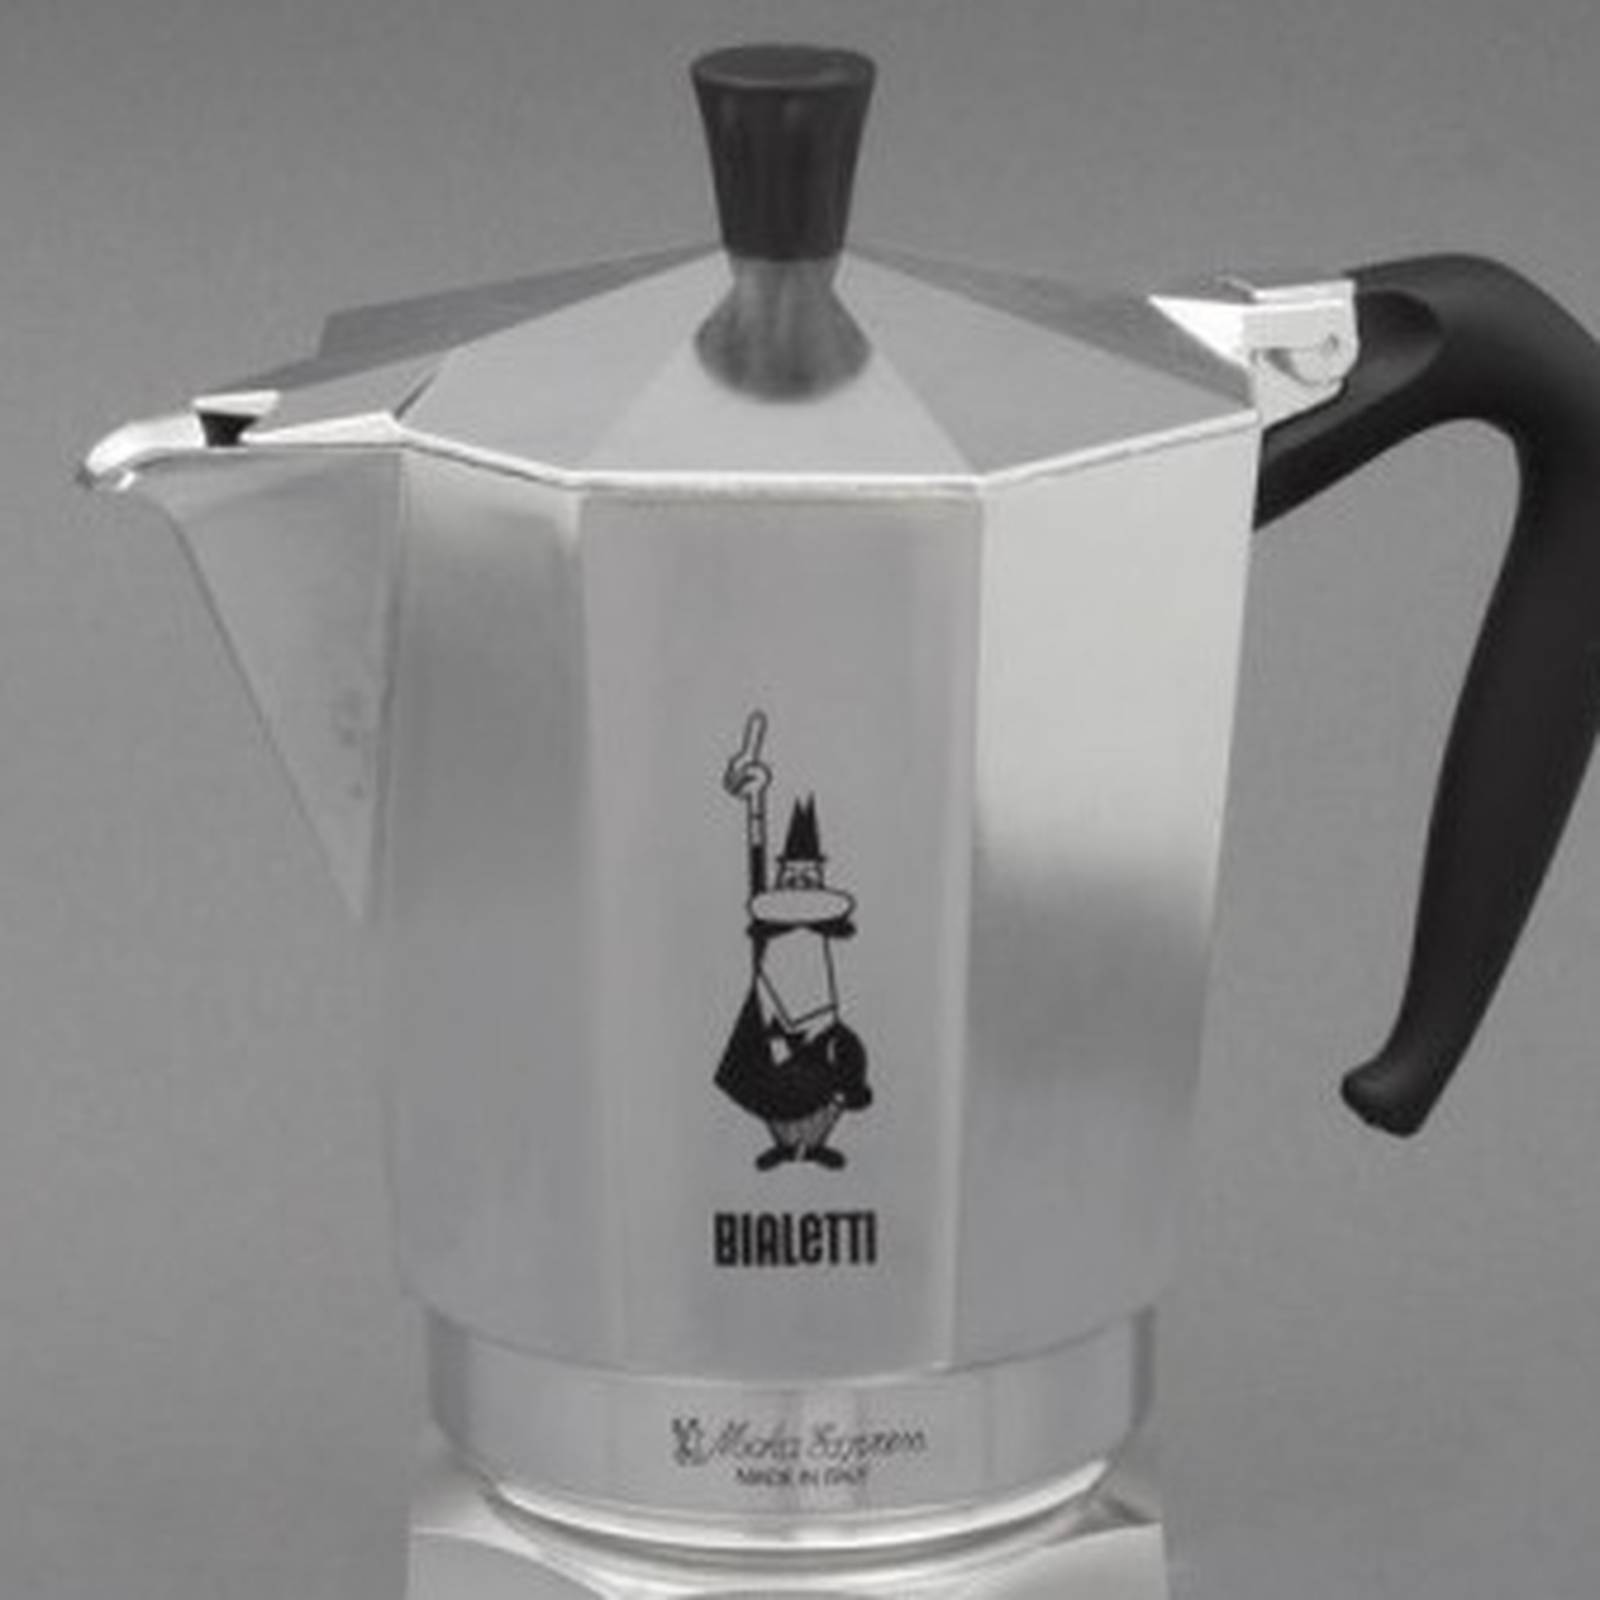 Verhandeling schroef Sandy Design Moment: Moka Express coffee pot created in 1933 – The Irish Times